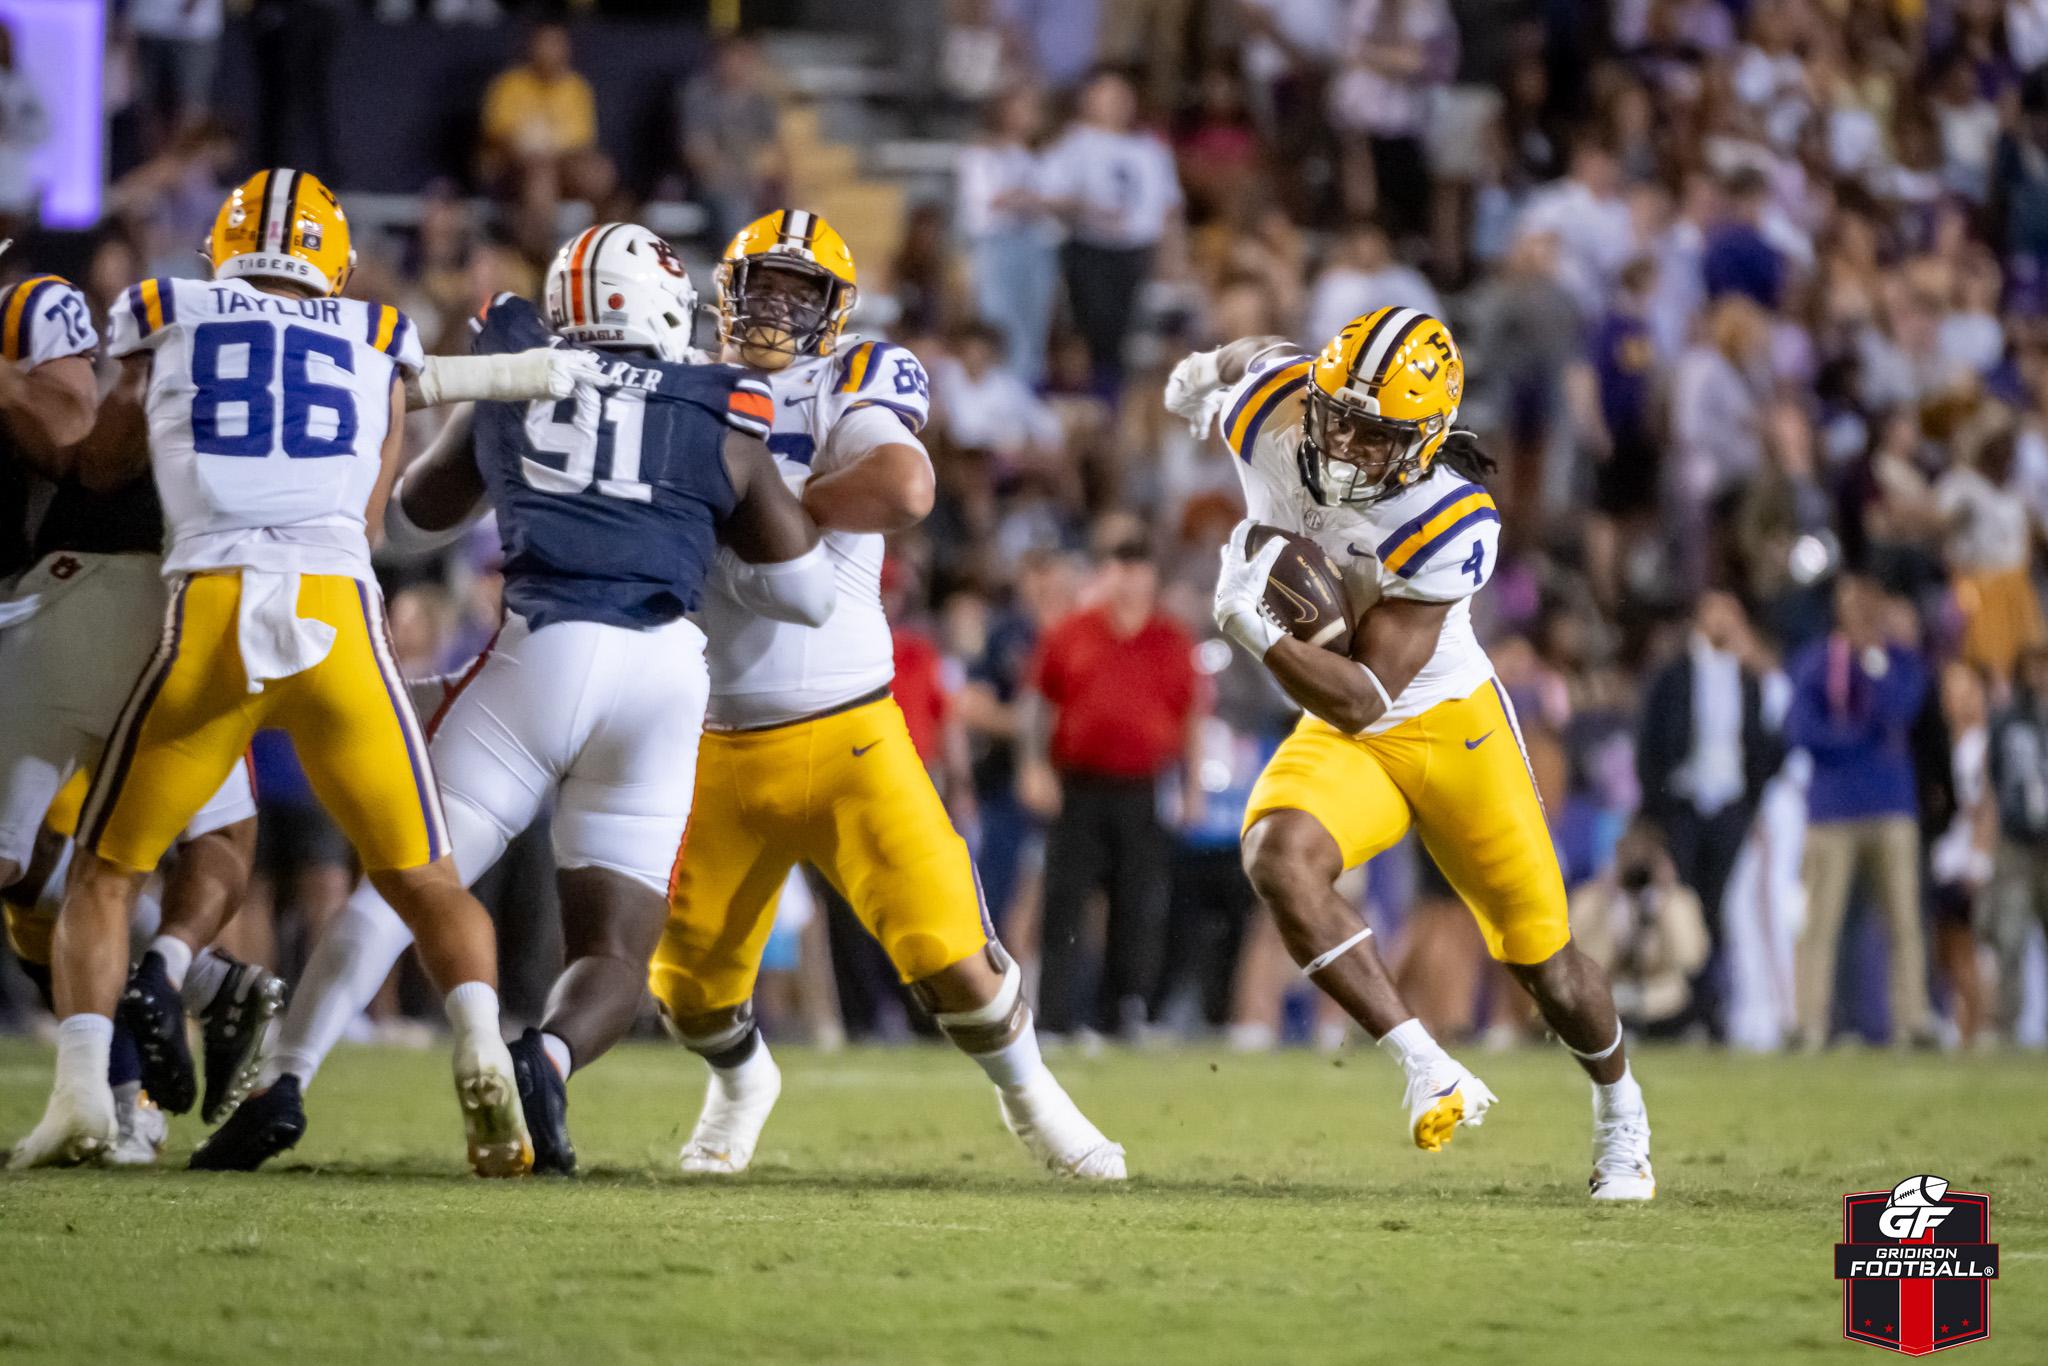 Vote Today On The Top LSU Plays So Far This Season